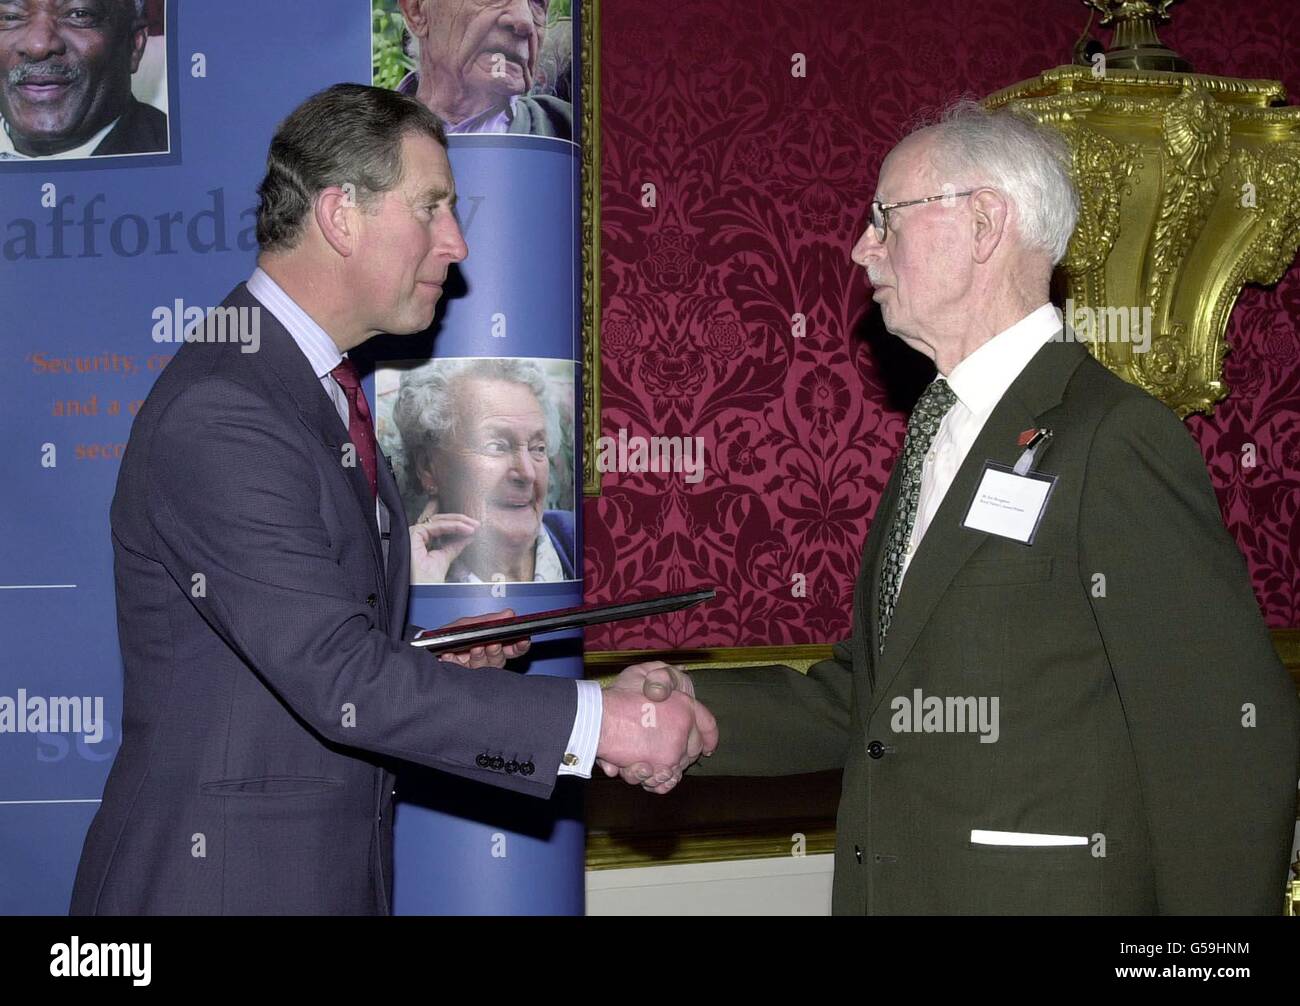 Prince of Wales shakes hands with Eric Broughton from Surrey, as he is presented with an award for his volunteer work for the Abbeyfield Society. The Prince, Patron of the Abbeyfield Society was at St James's Palace in London. *.. to salute some of the 15,000 workers of the Society, who help to alleviate isolation for the elderly, and provide care at sheltered accomodation around Britain. Stock Photo